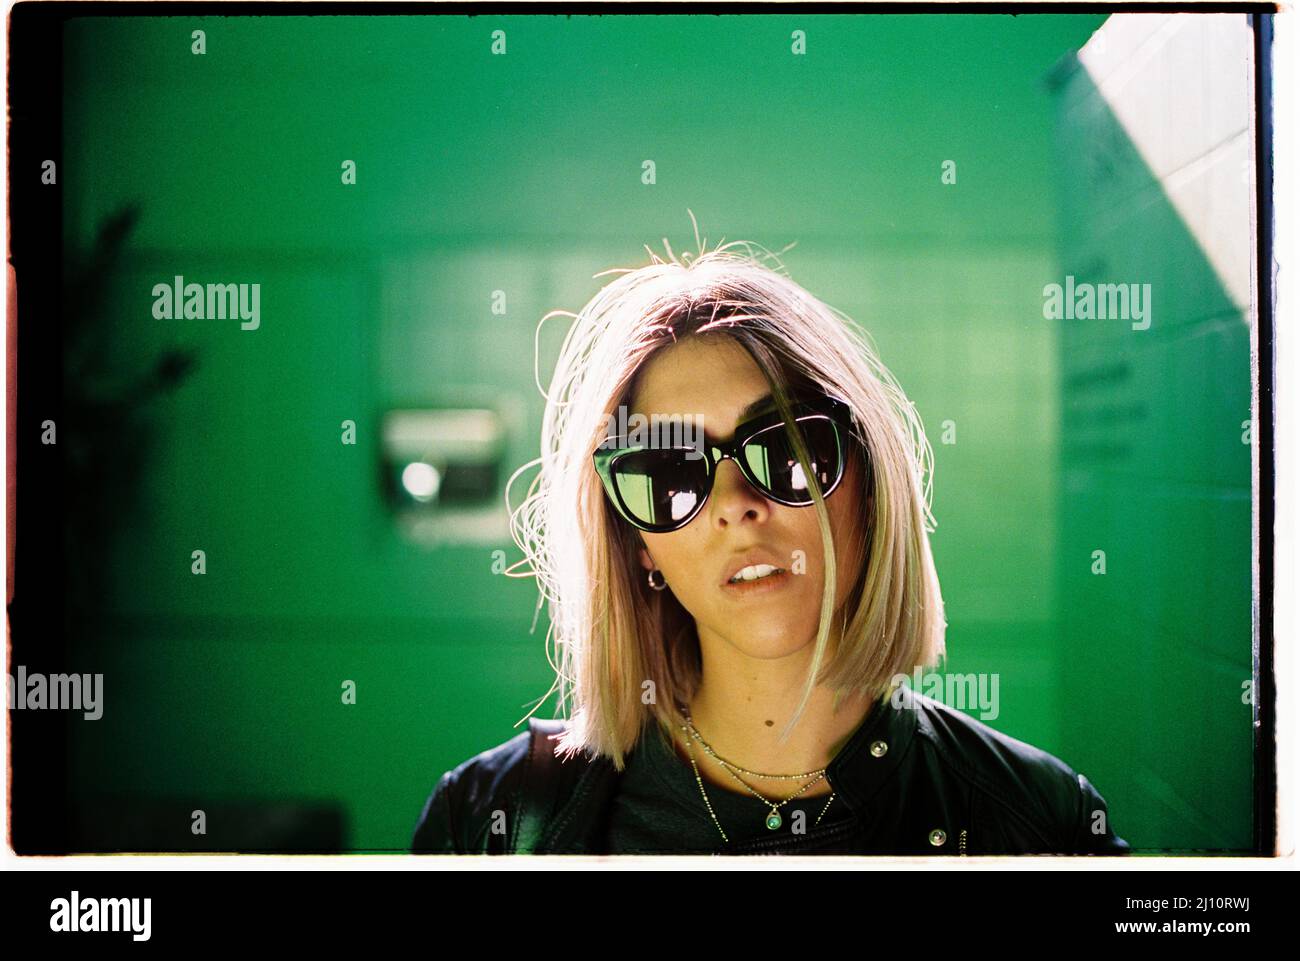 Blond woman on a green room with sunglasses and backlight Stock Photo